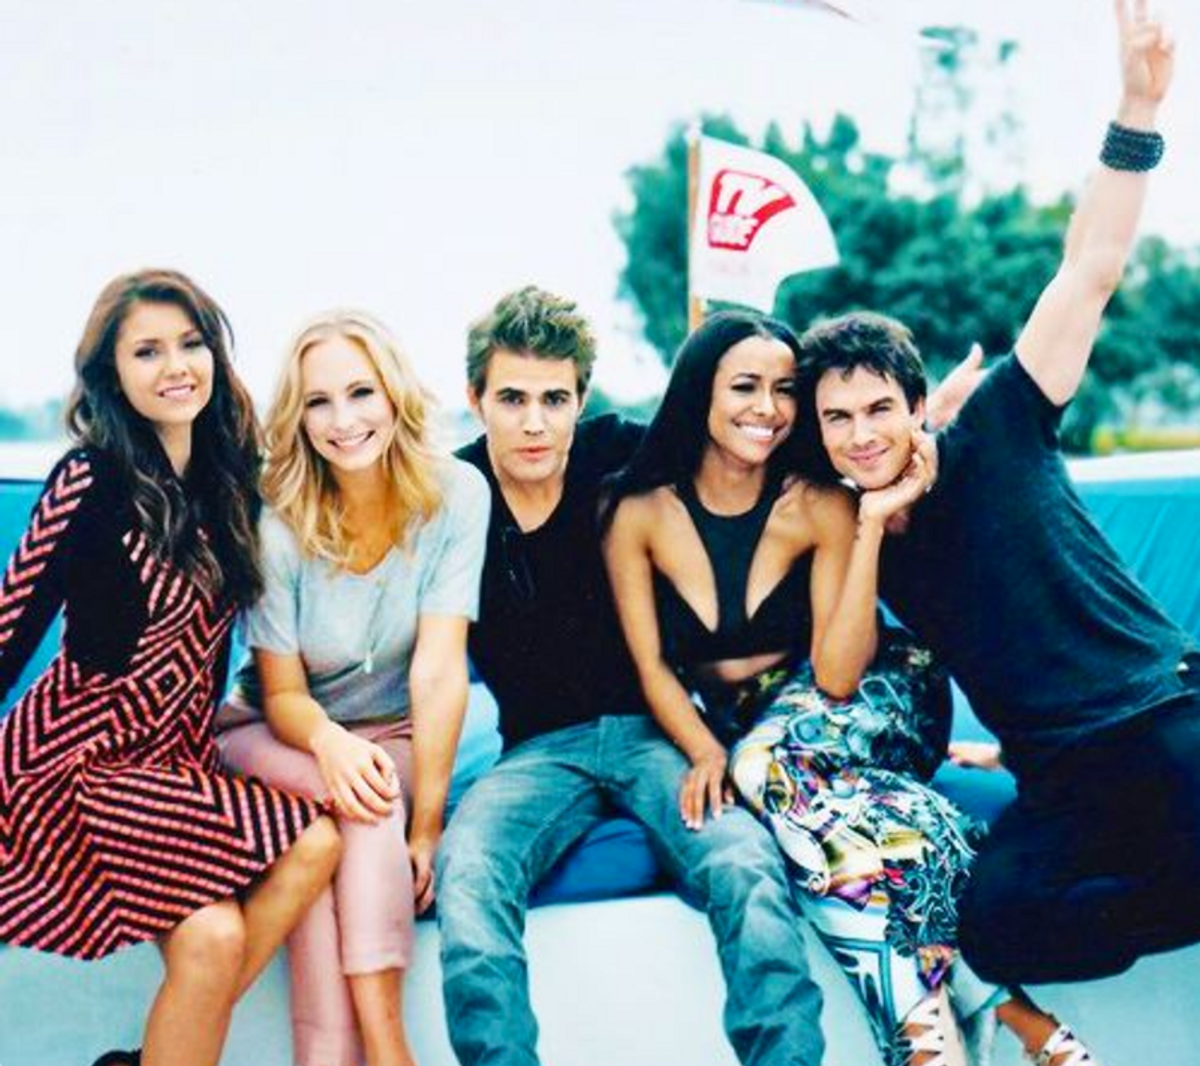 8 Life Lessons The Vampire Diaries Taught Me